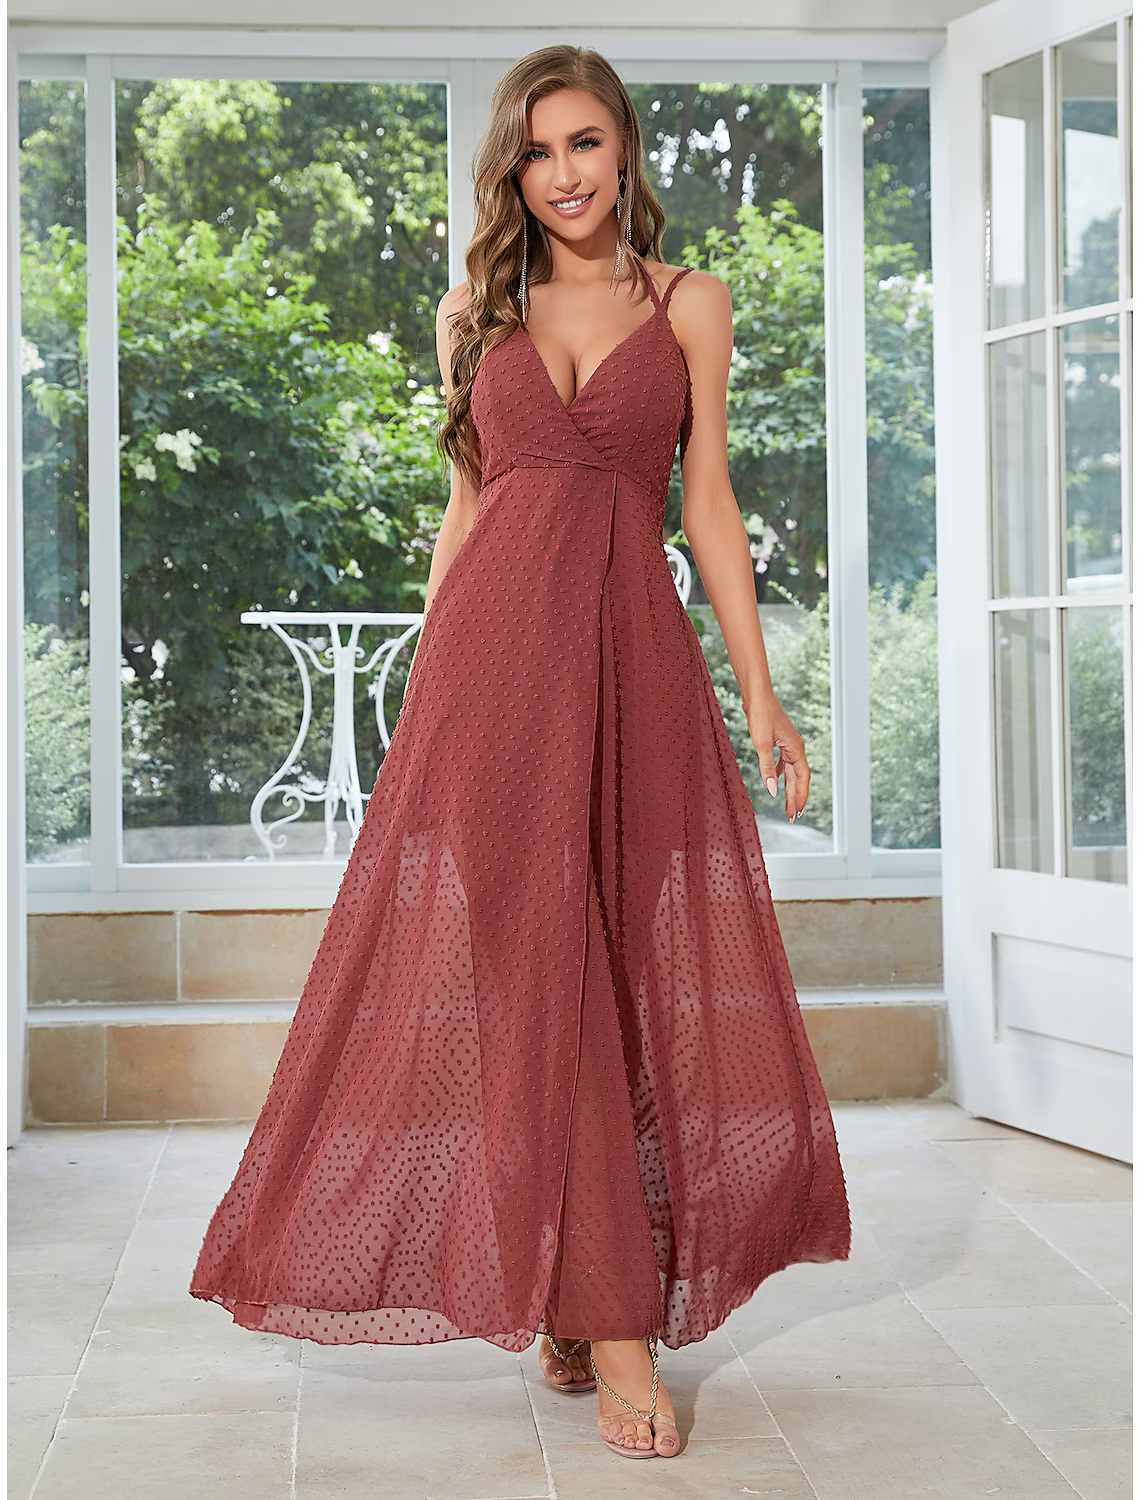 A-Line Wedding Guest Dresses Elegant Dress Party Wear Floor Length Sleeveless Strap Chiffon with Strappy